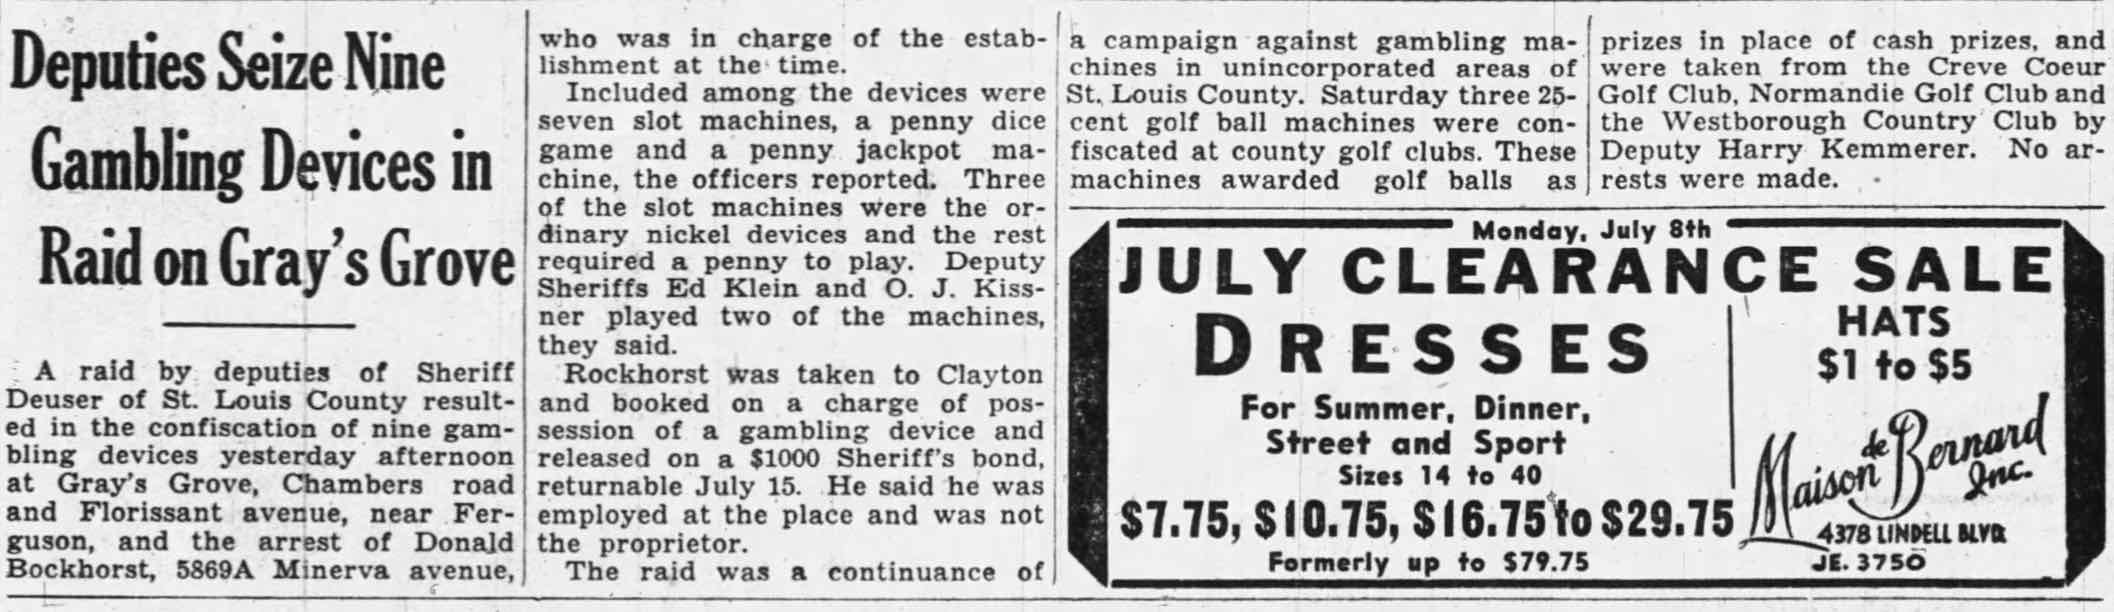 Gambling Device Found at Gray’s Grove 1935